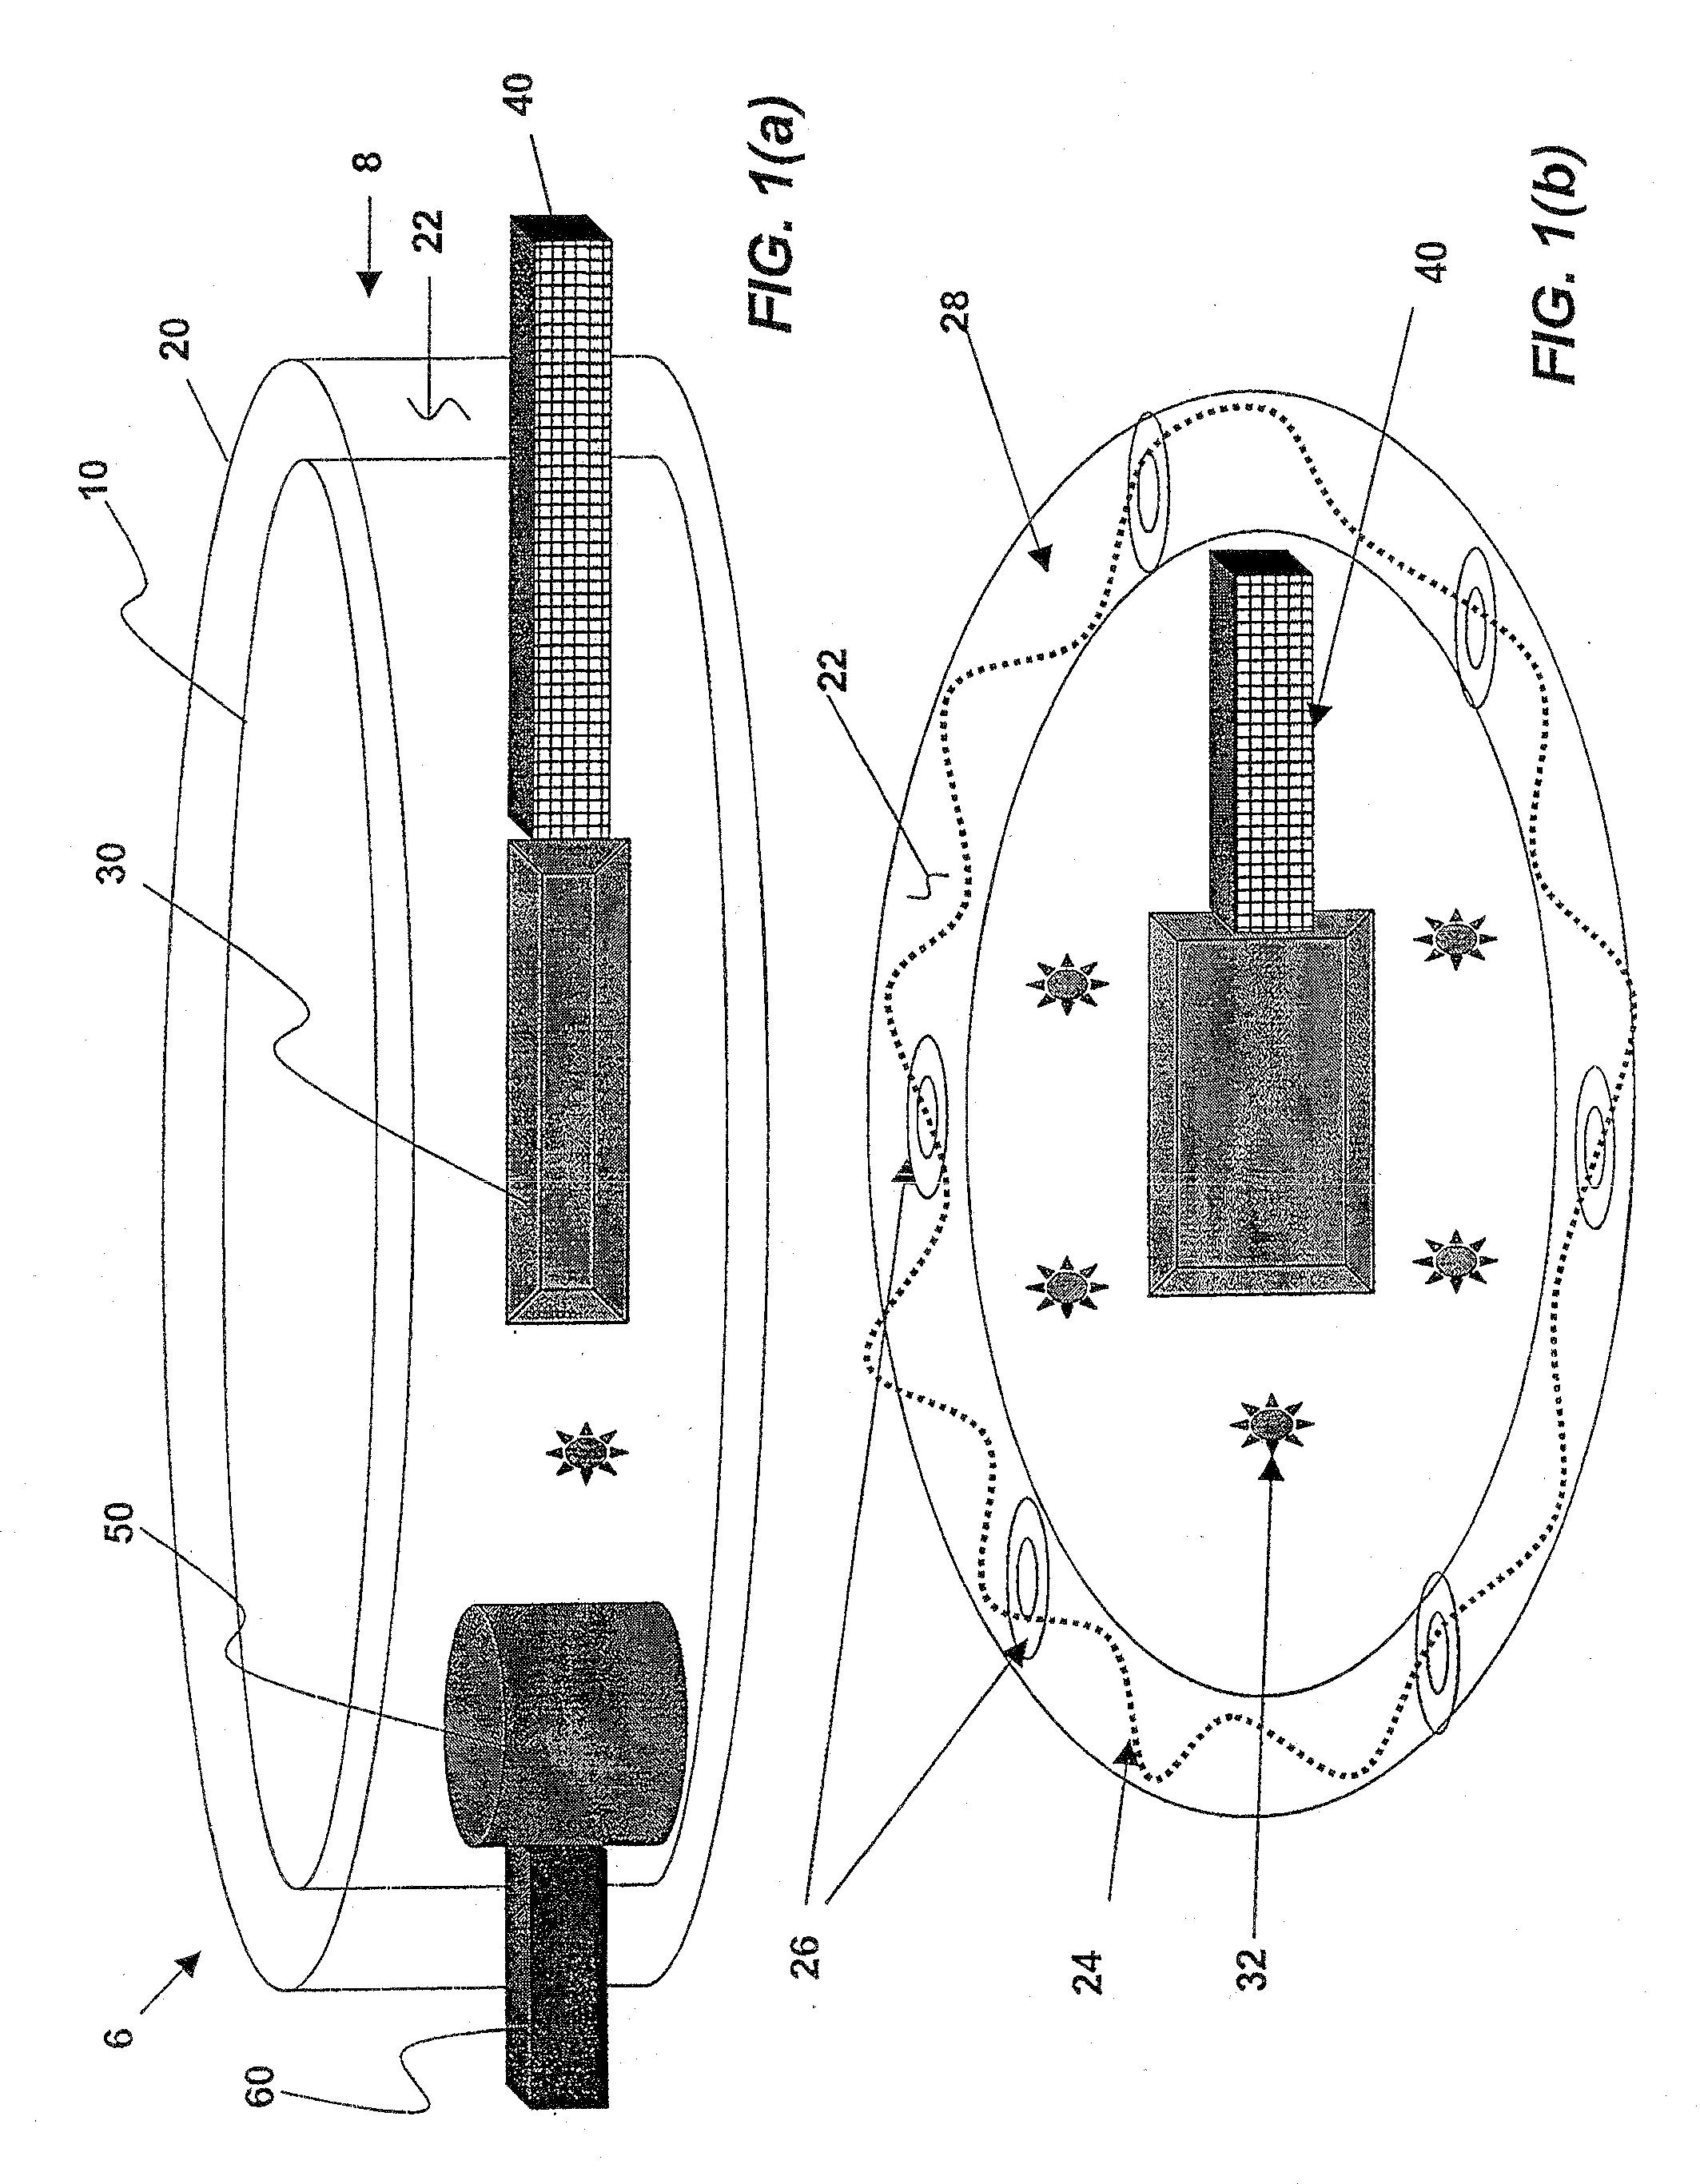 Method and apparatus for the management of diabetes